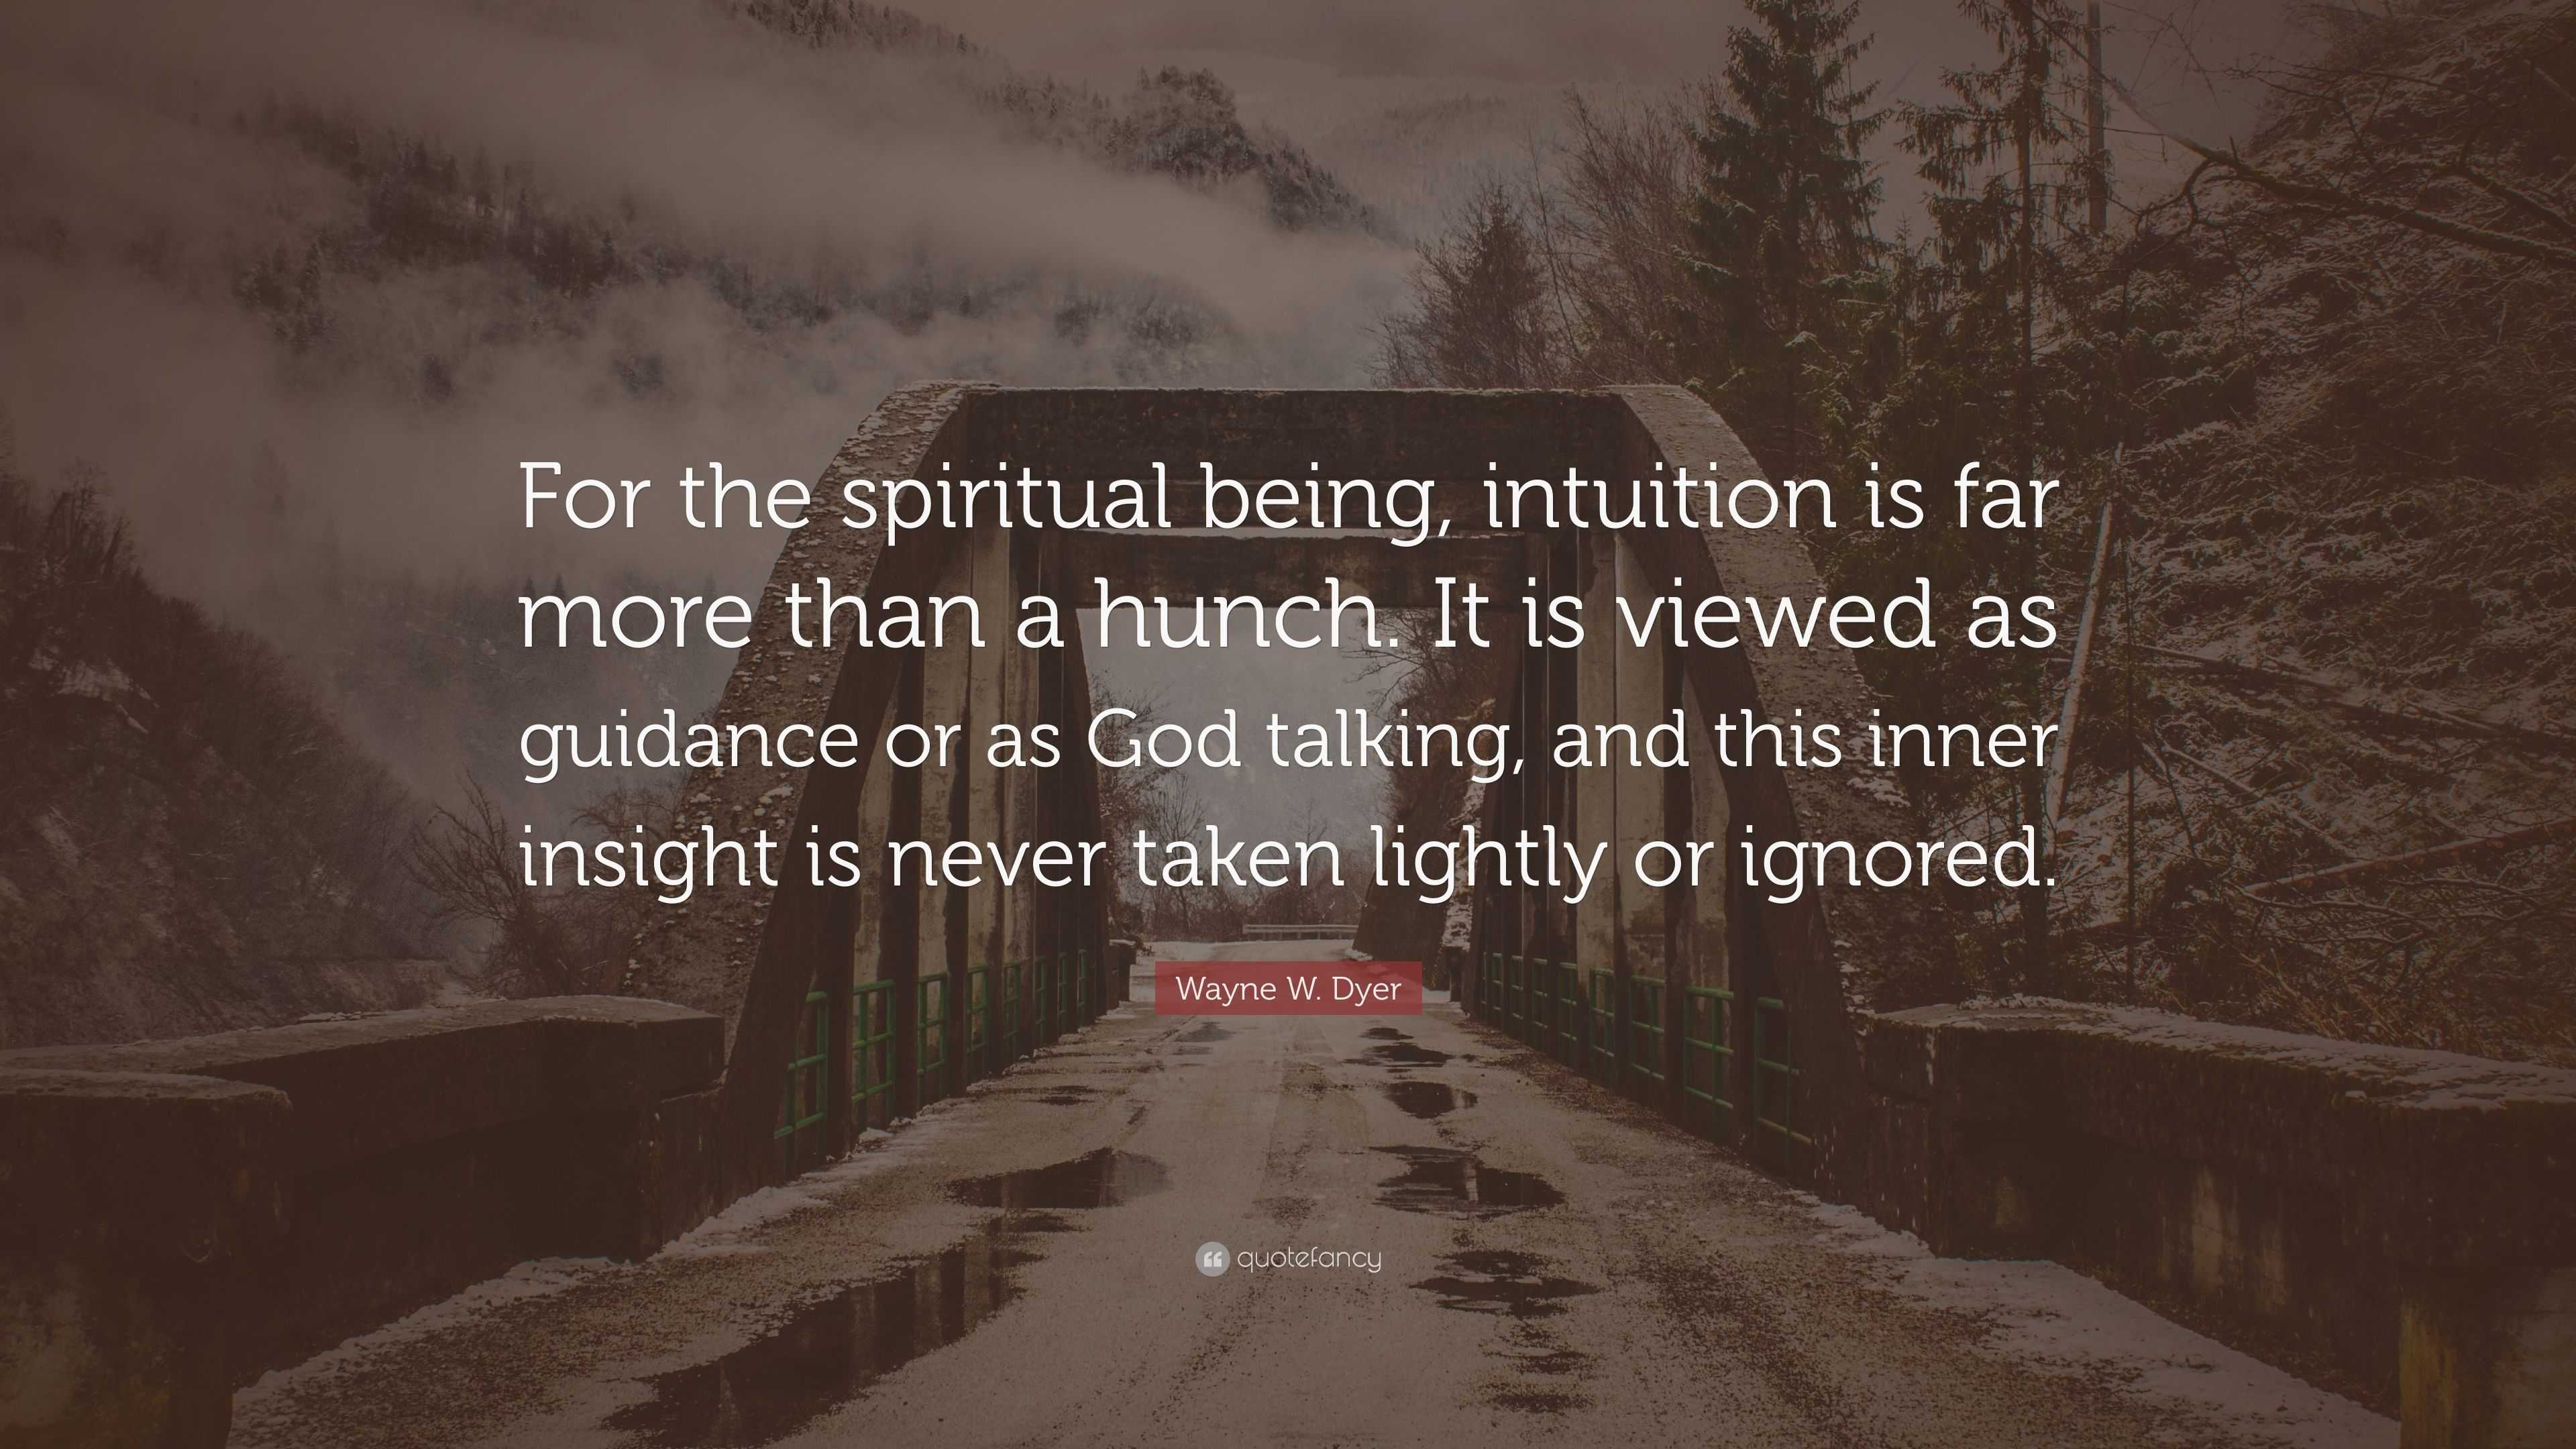 Wayne Dyer quote: For the spiritual being, intuition is far more